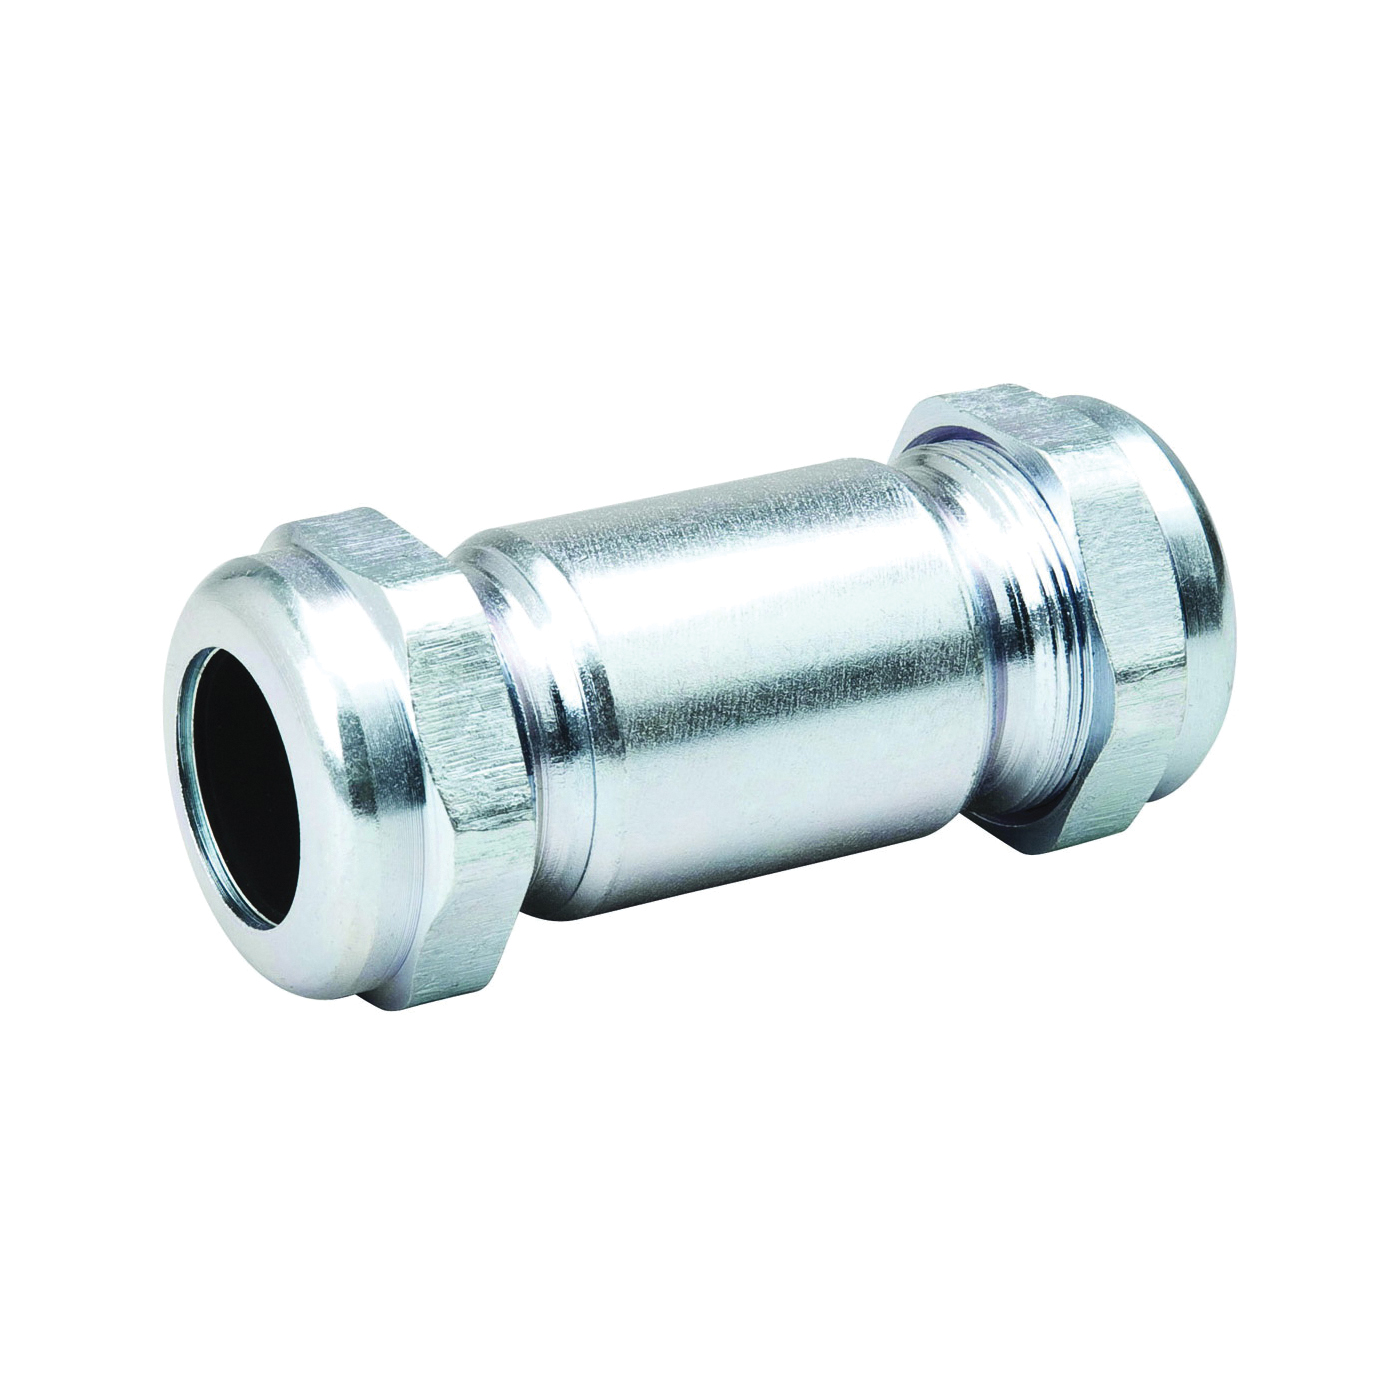 160-008HC Pipe Coupling, 2 in, Compression x IPS, 125 psi Pressure